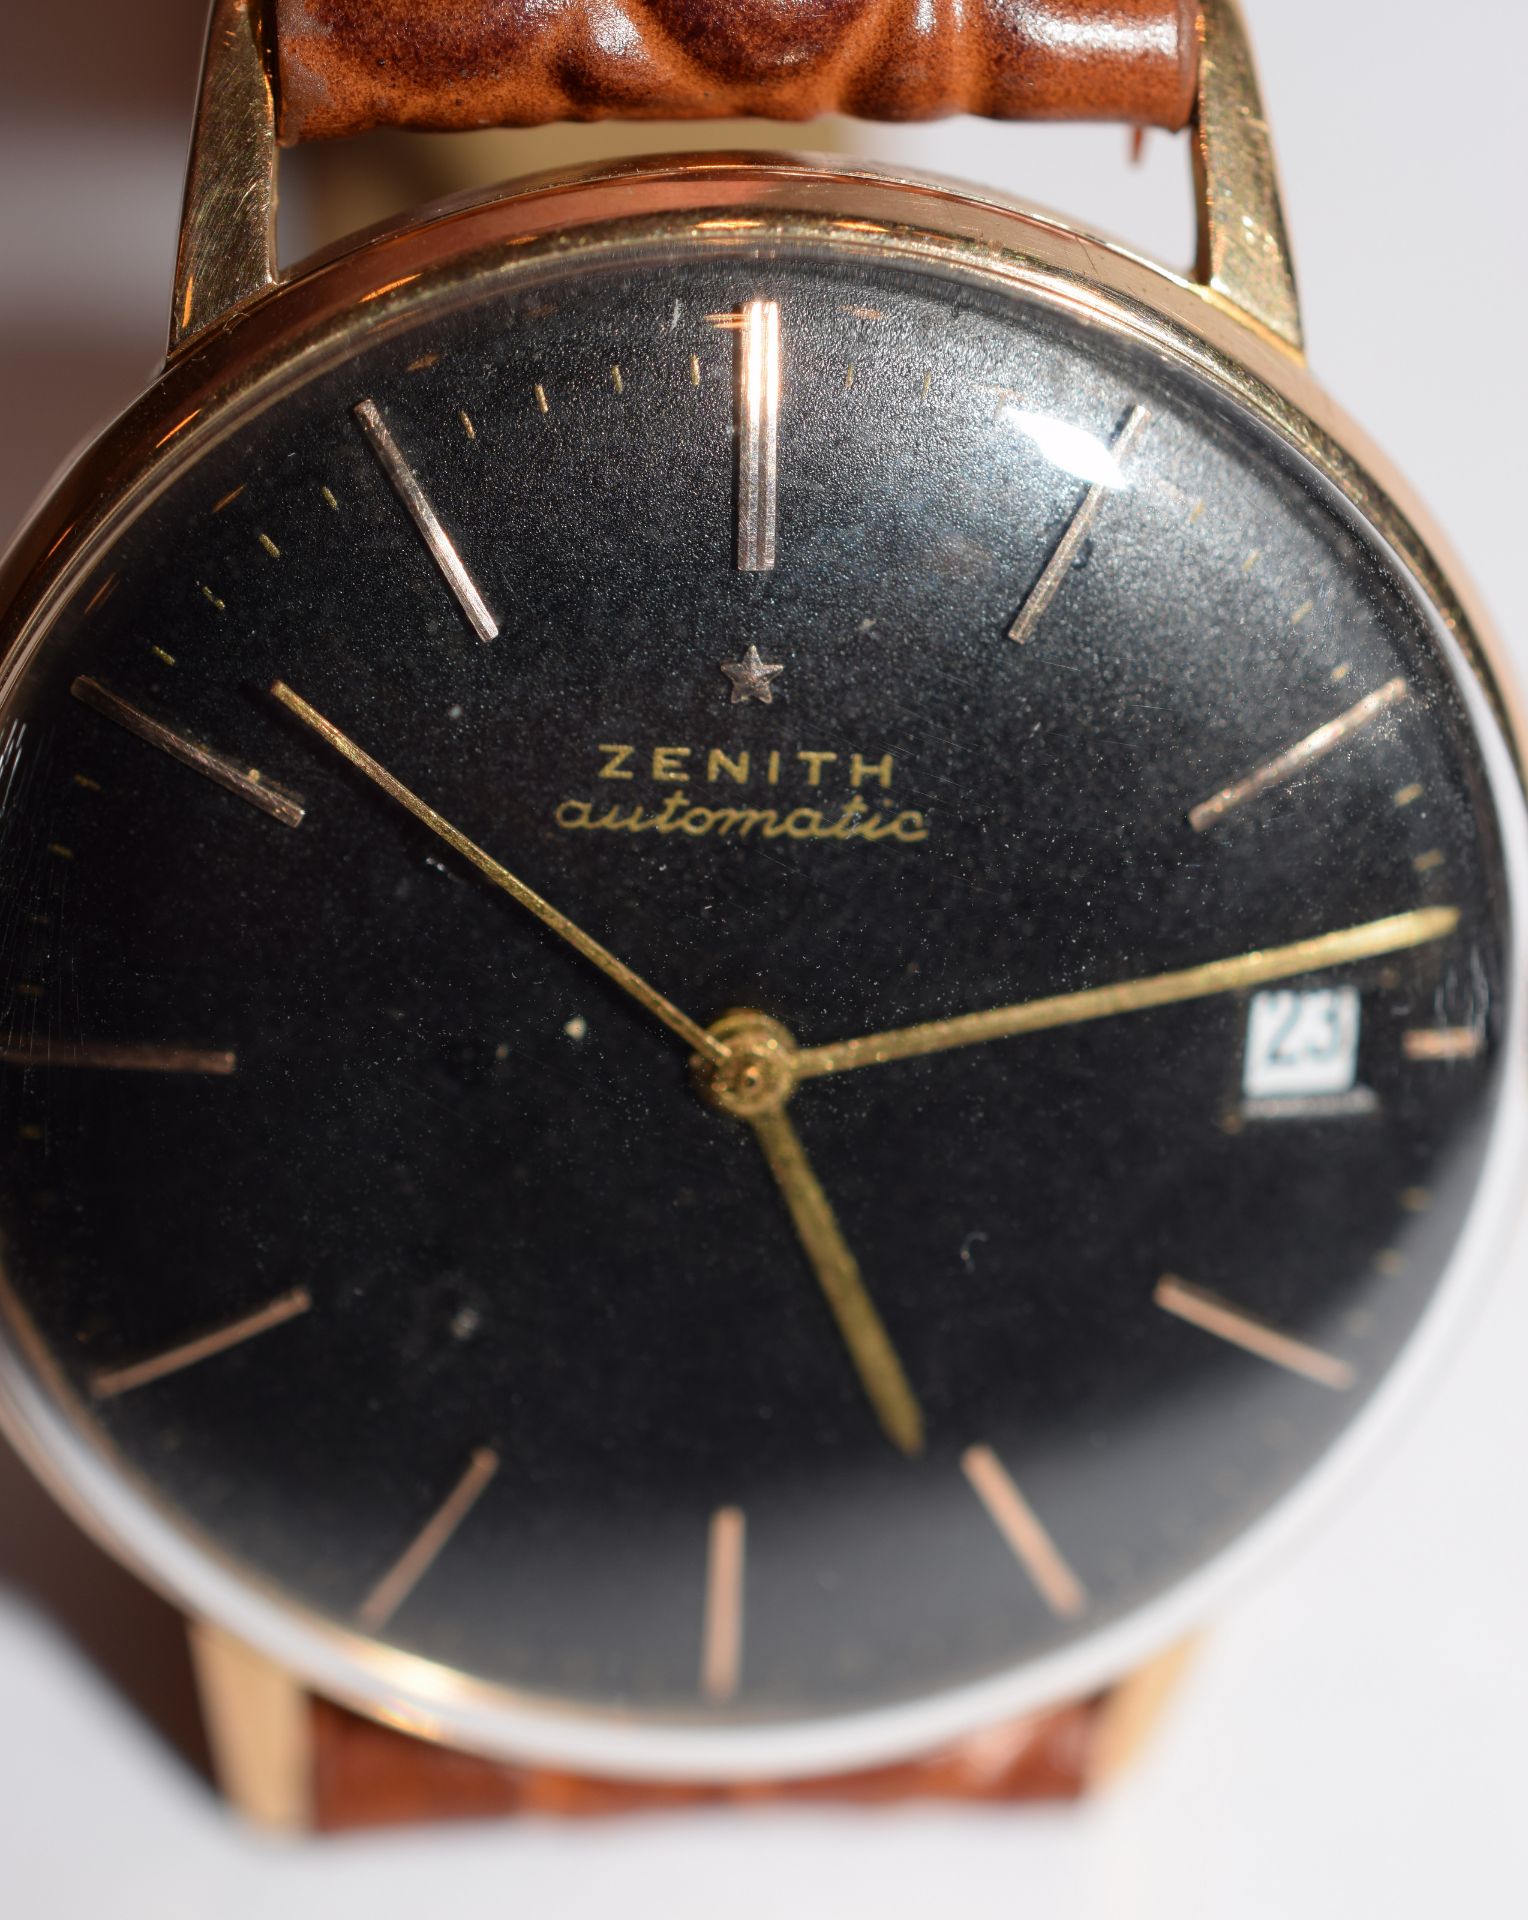 18ct Gold Zenith Wristwatch - Image 7 of 7